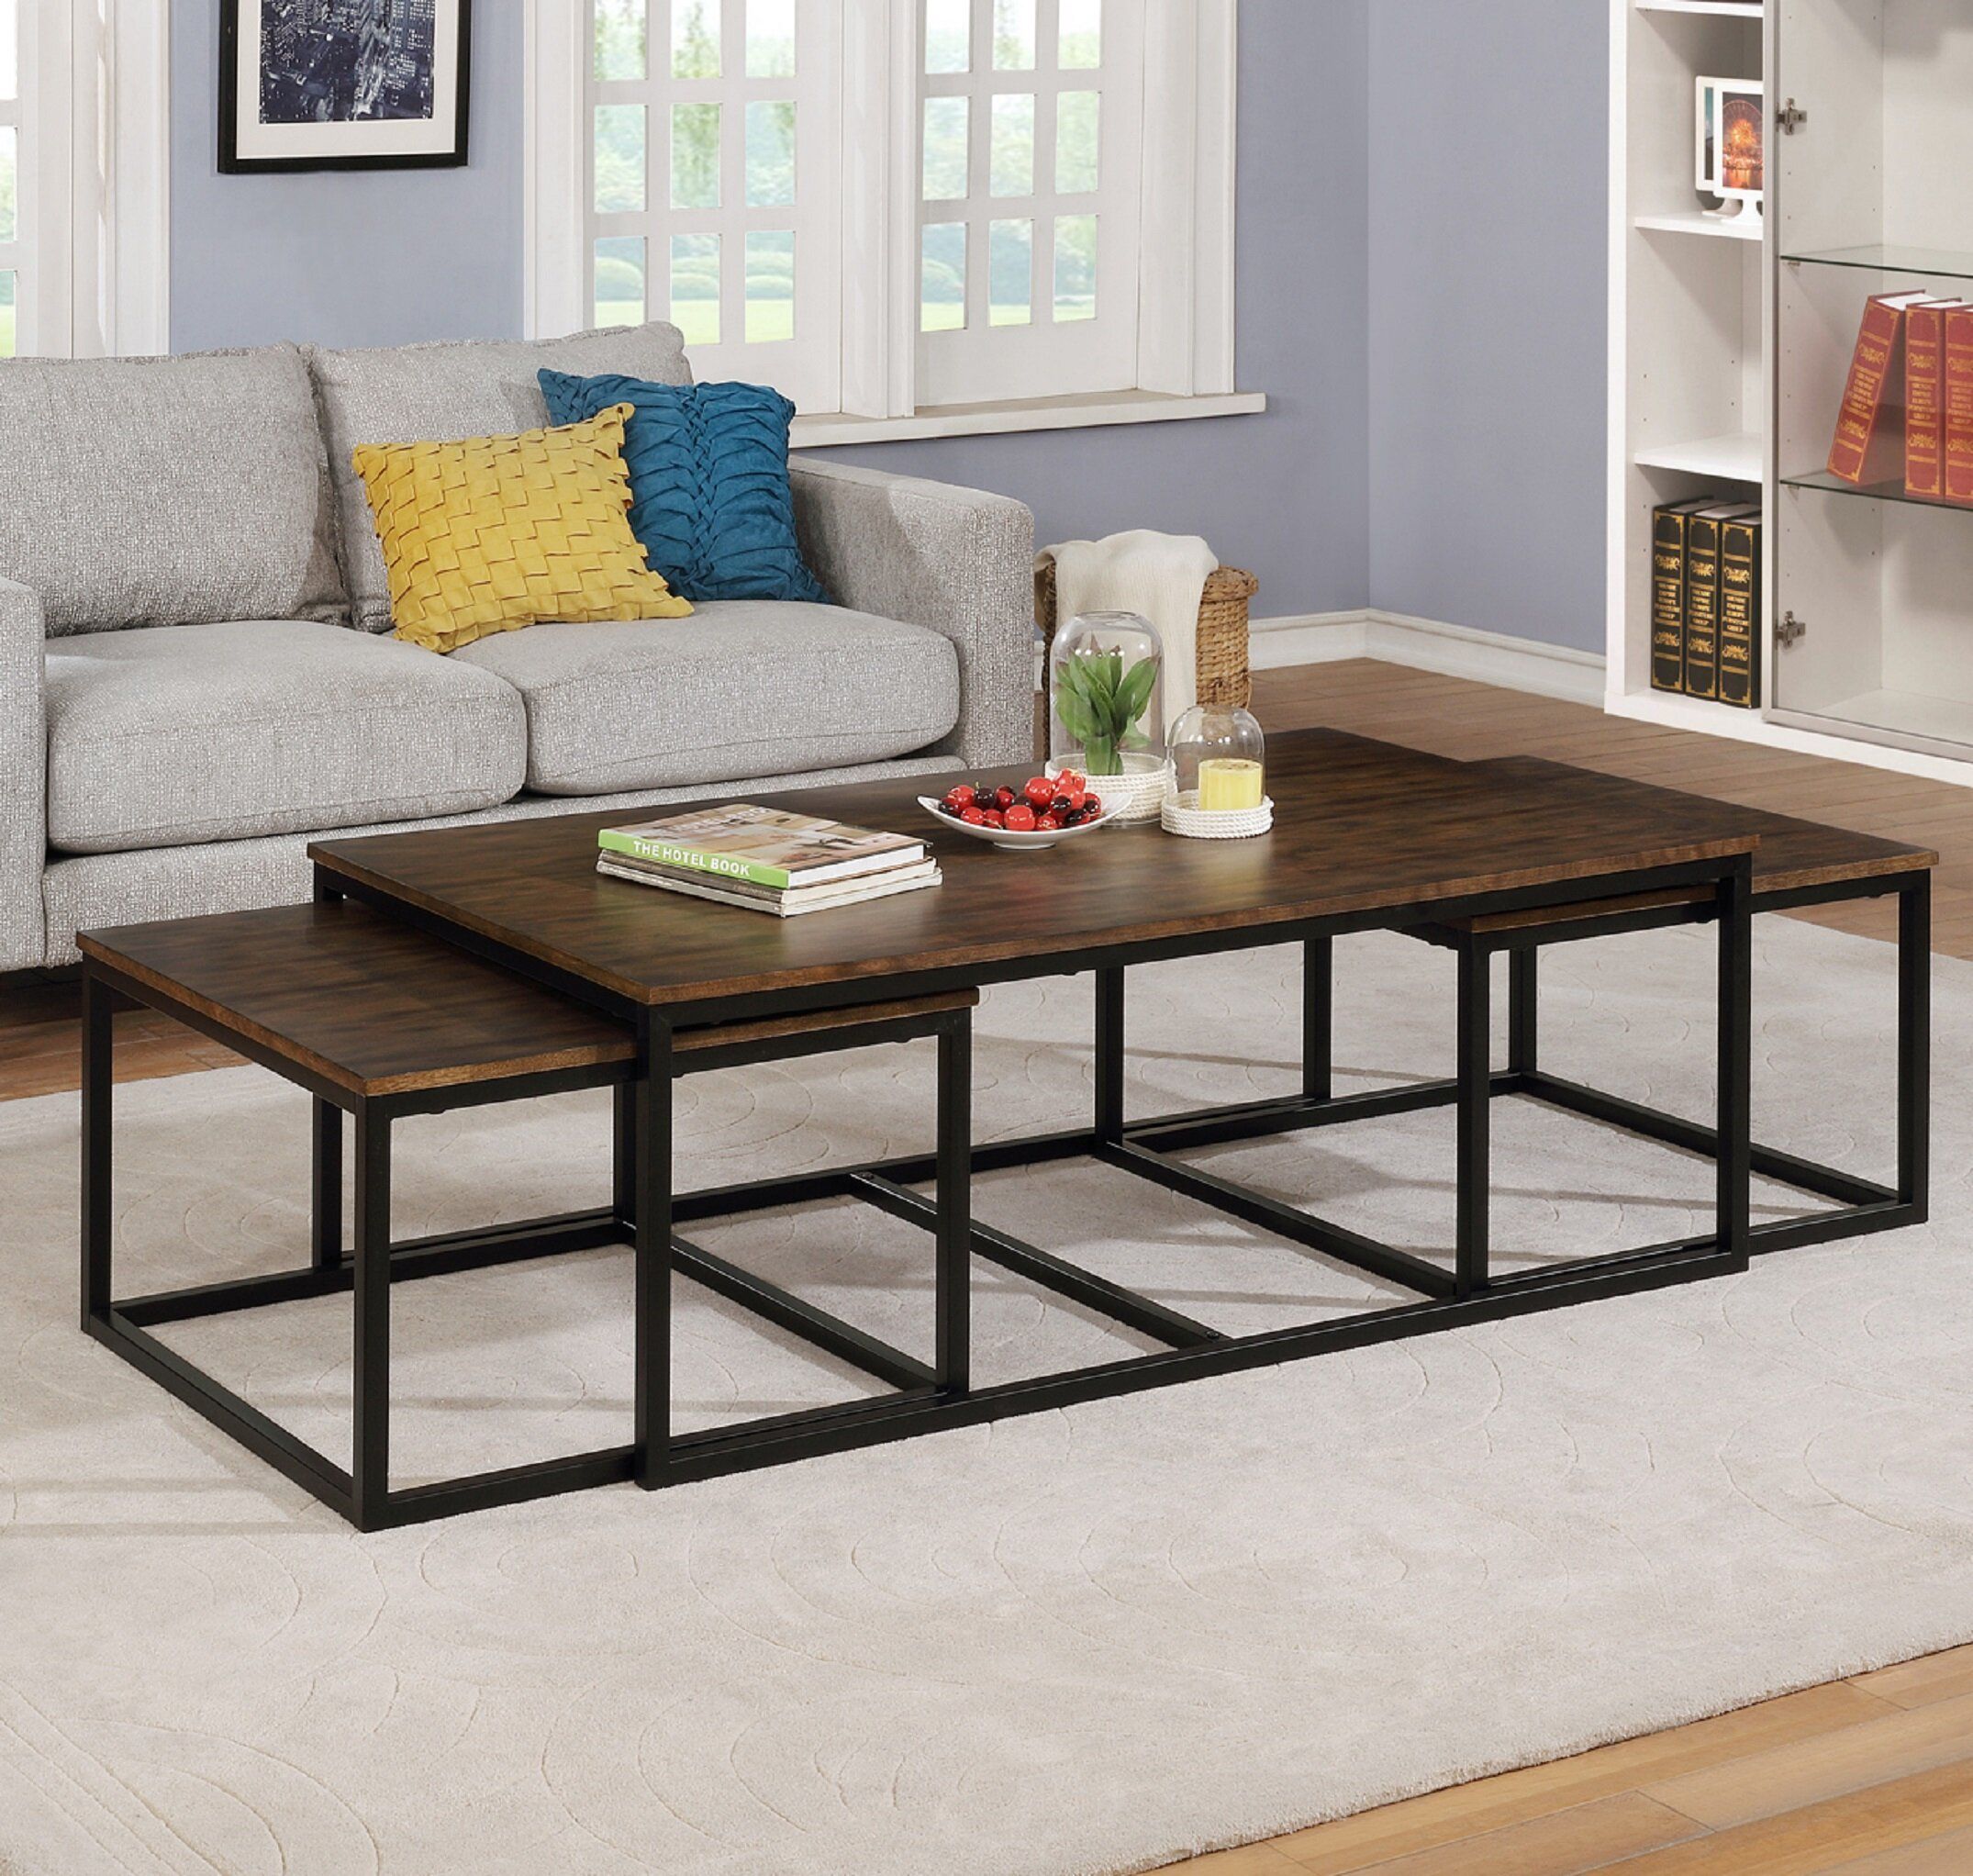 Laurel Foundry Modern Farmhouse Kersh Nesting Coffee Table & Reviews –  Wayfair Canada In Coffee Tables Of 3 Nesting Tables (View 11 of 15)